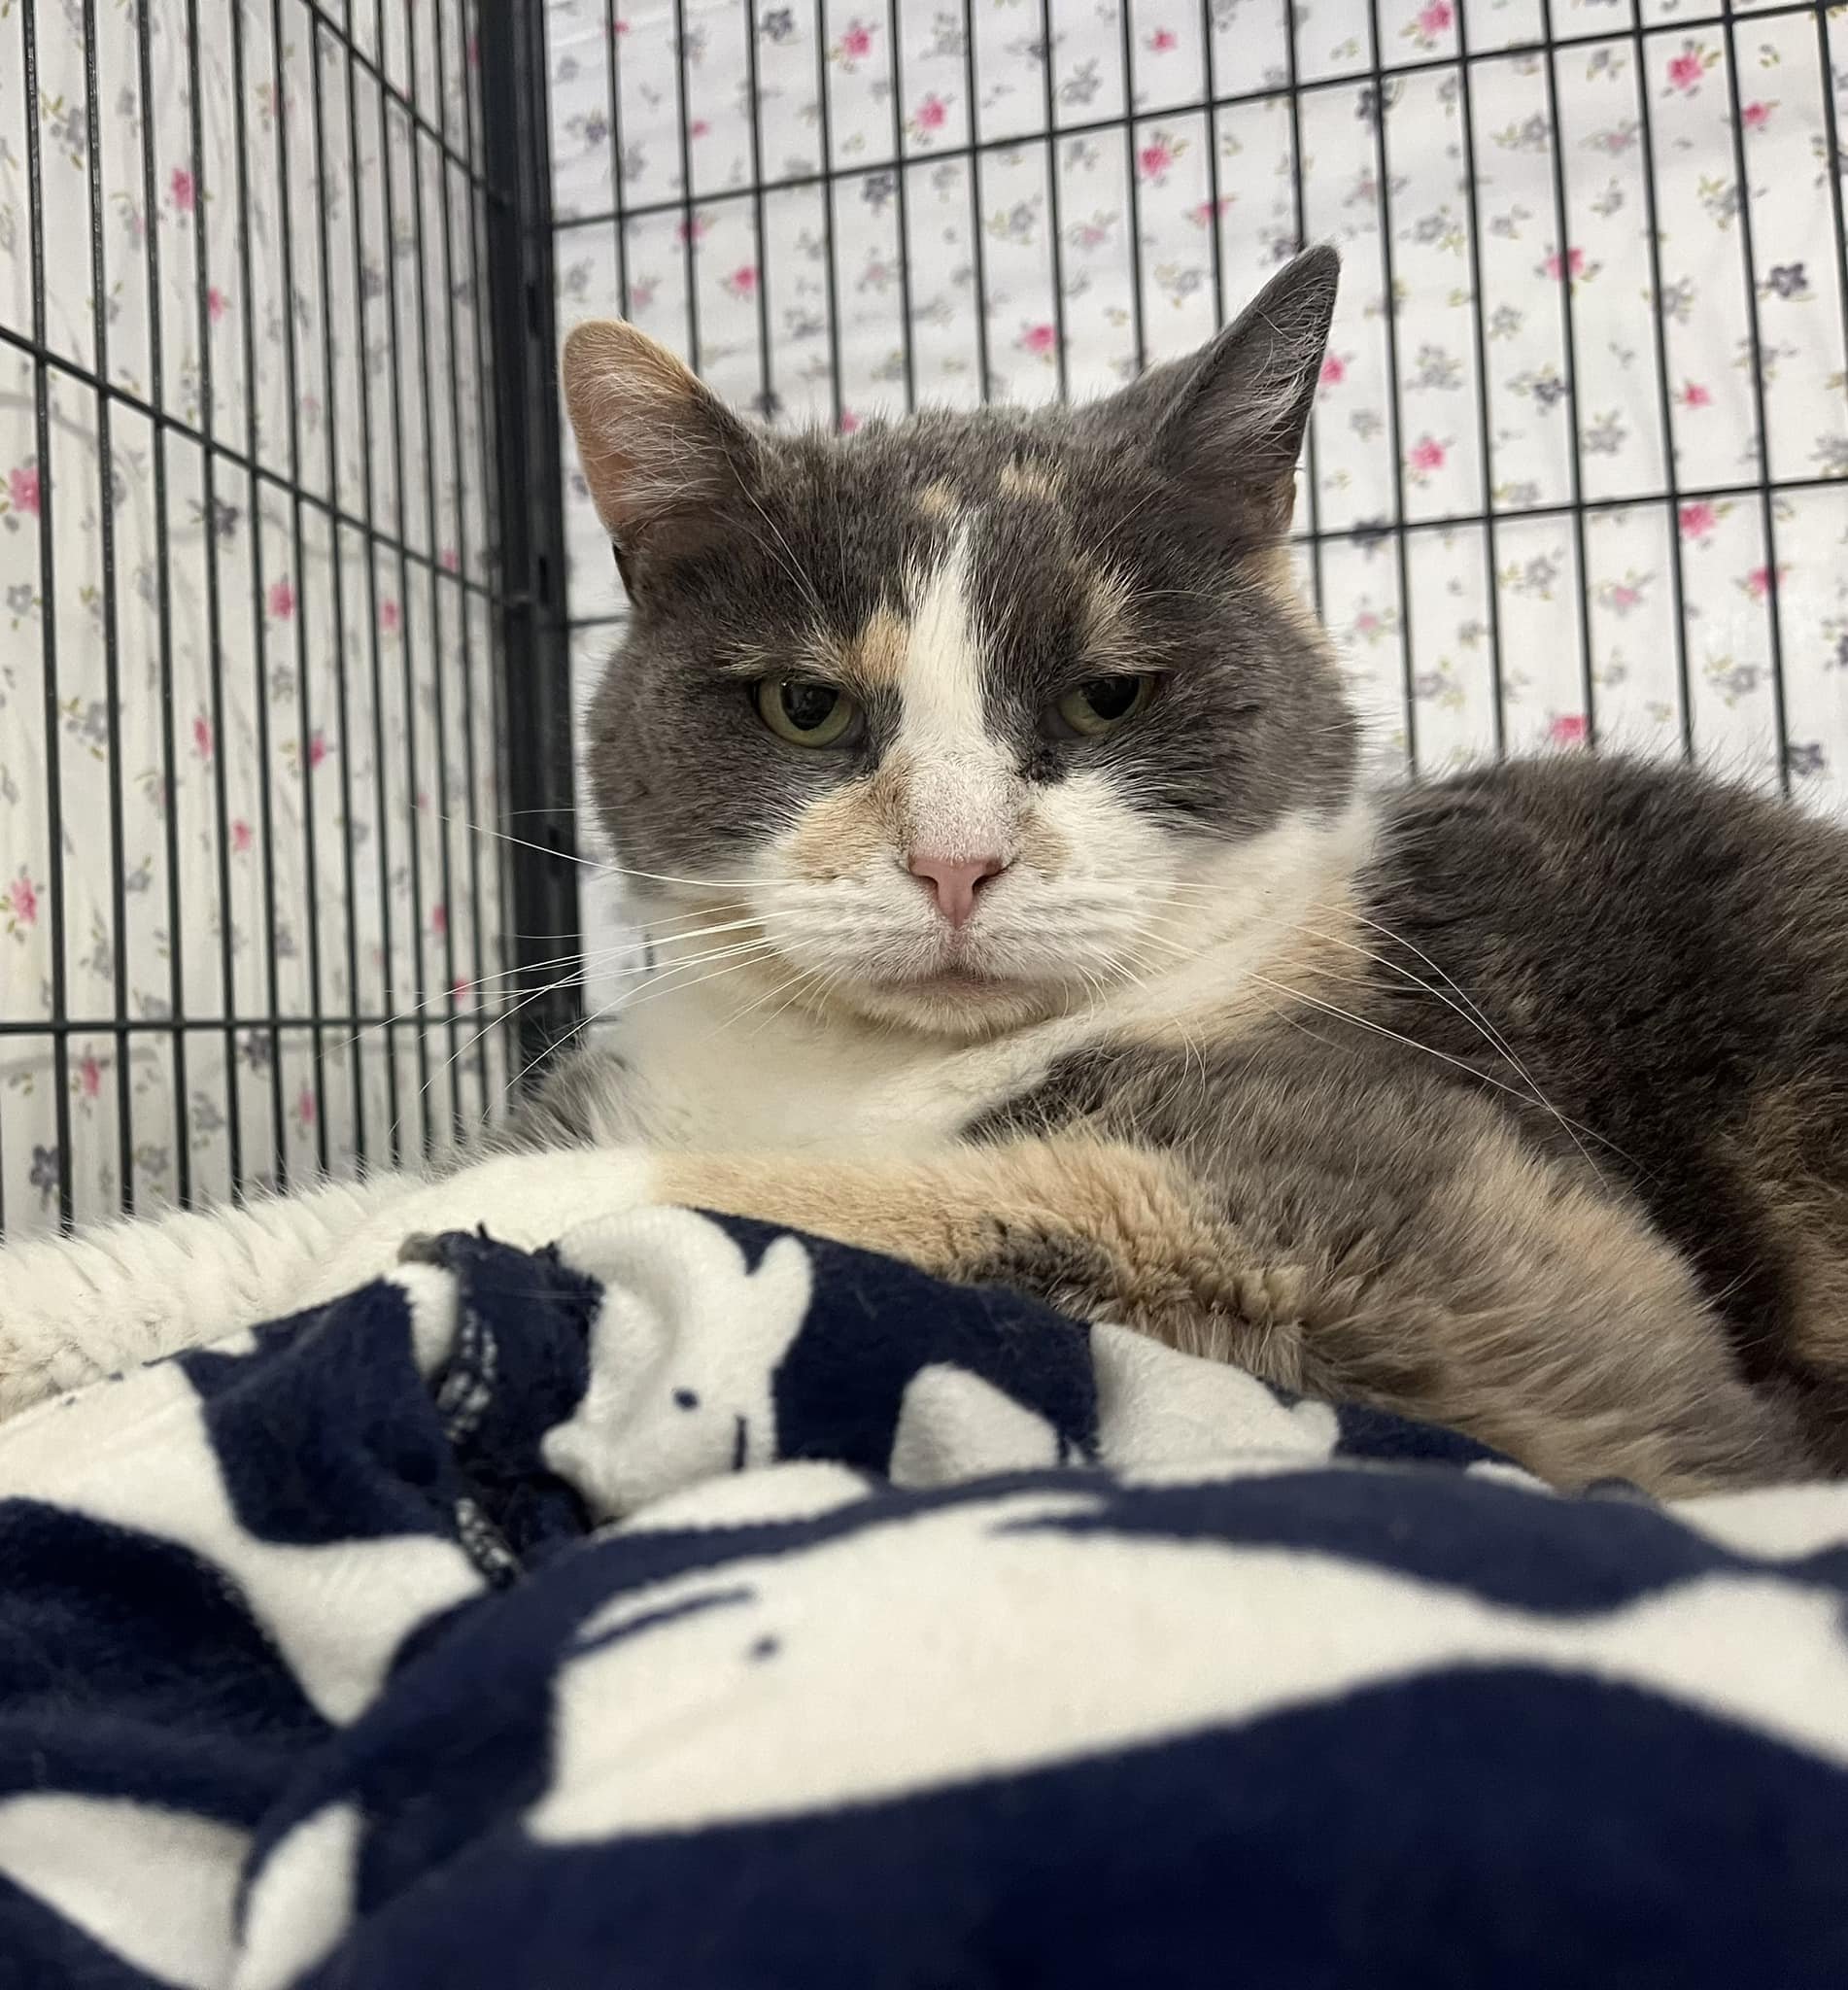 It&rsquo;s the moment we&rsquo;ve all been waiting for! Time to put the spotlight on a cat that, frankly, deserved to go first thank you very much. That&rsquo;s right, this sweet senior Sunday our Cat Of The Hour is&hellip;Hvala!

Hvala arrived at An